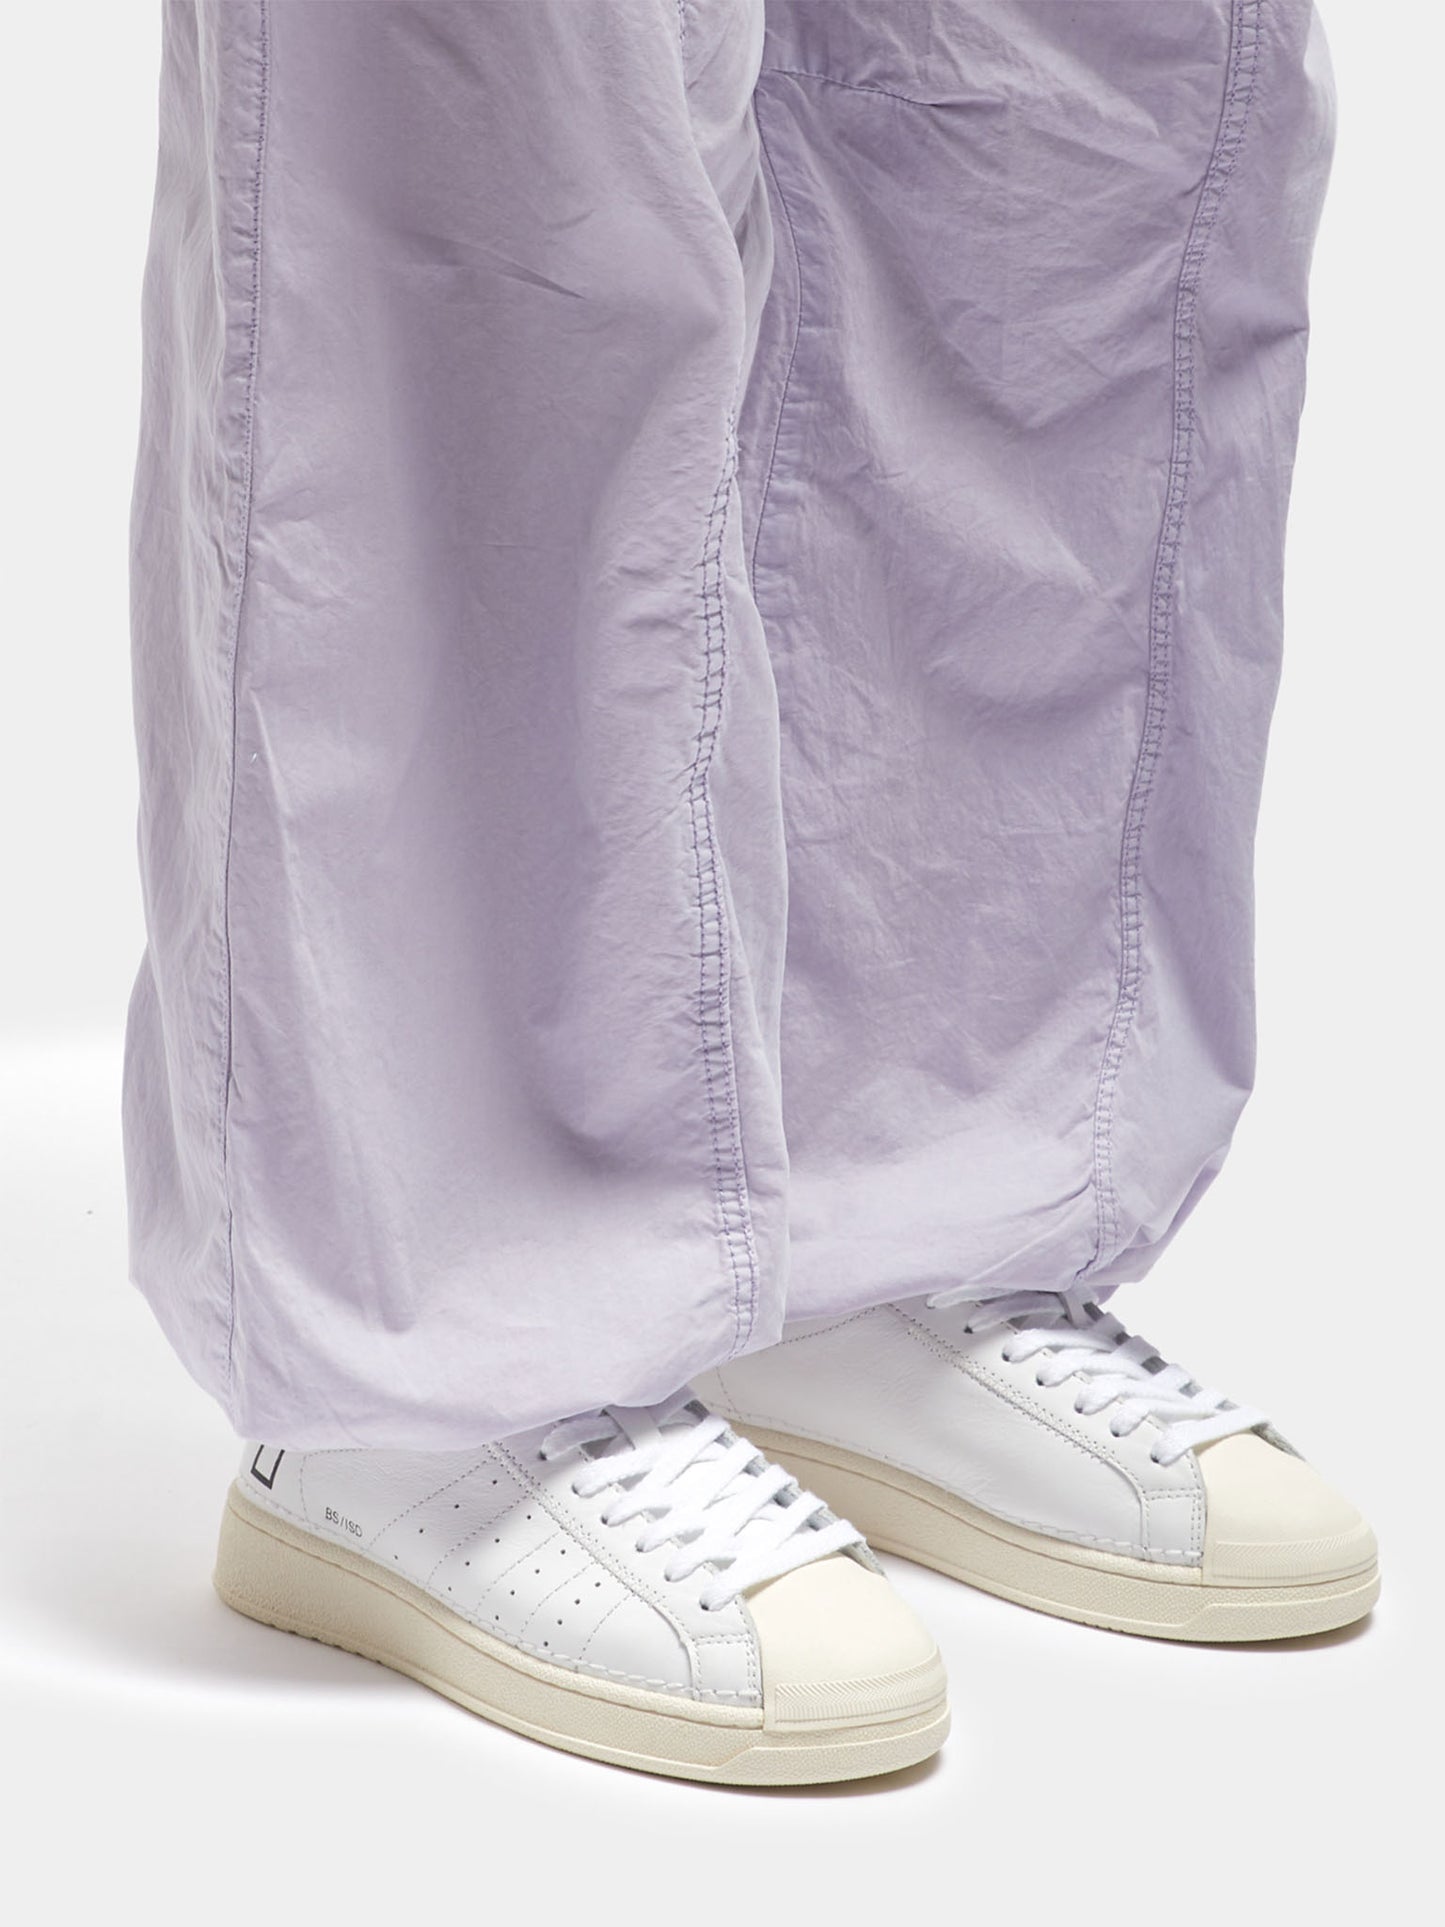 D.A.T.E Base Island White Cream Trainers on model wearing lilac trousers